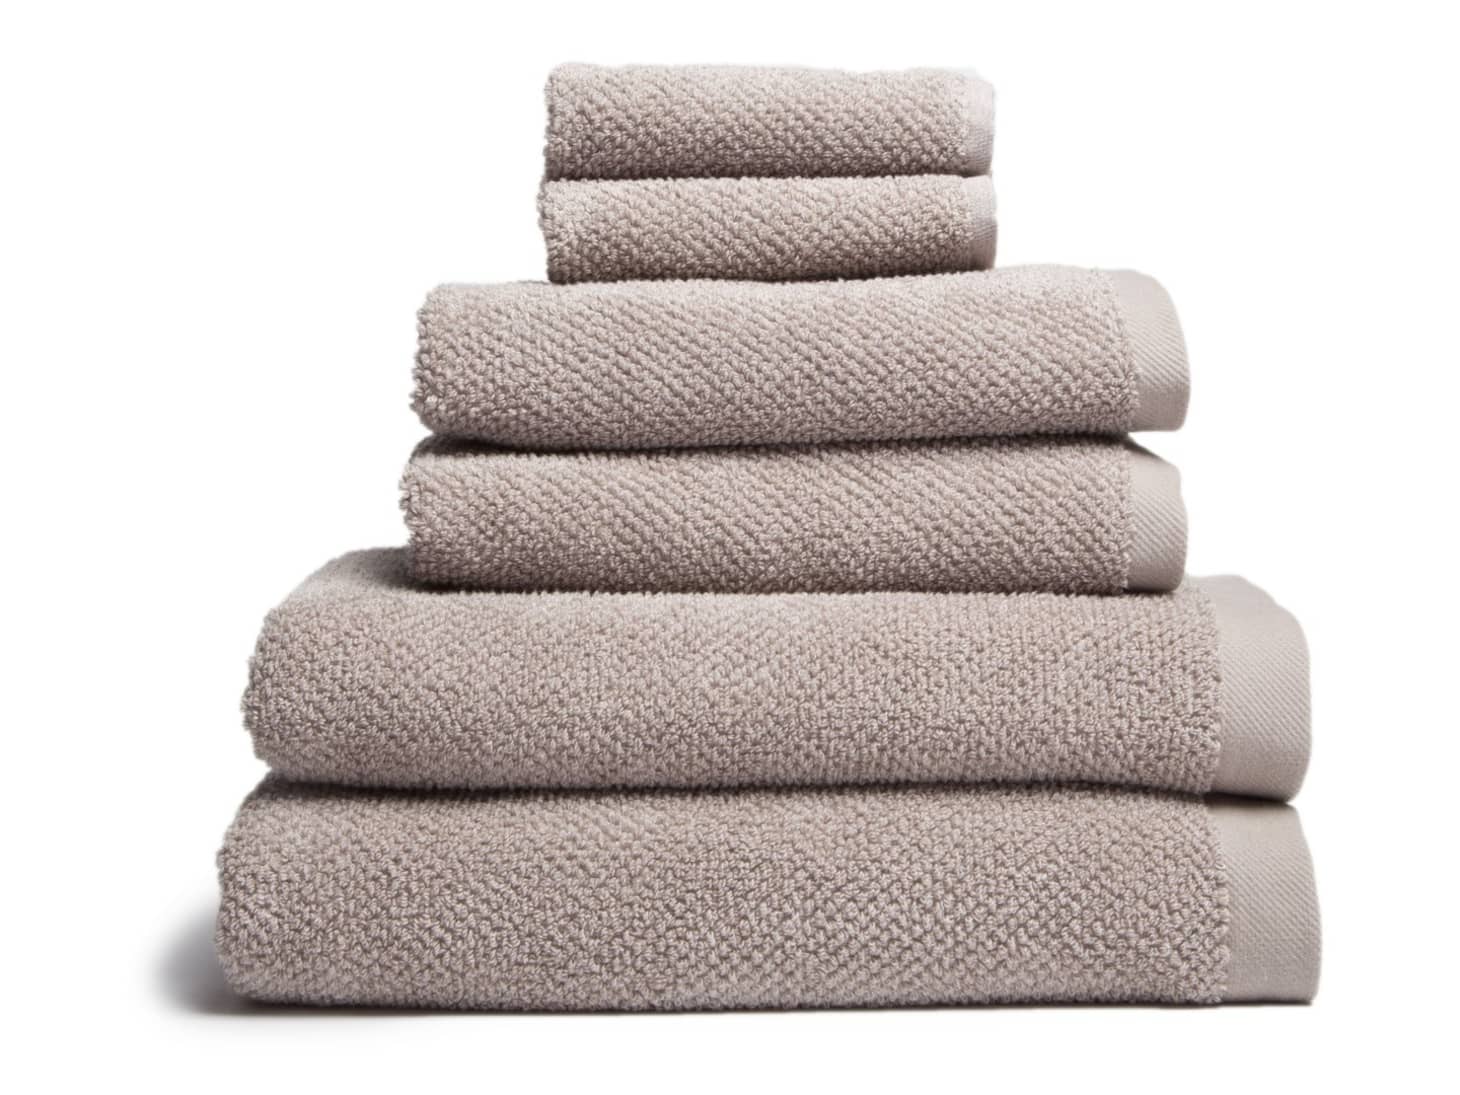 The Best Bath Towels To Buy In 2020 | Apartment Therapy